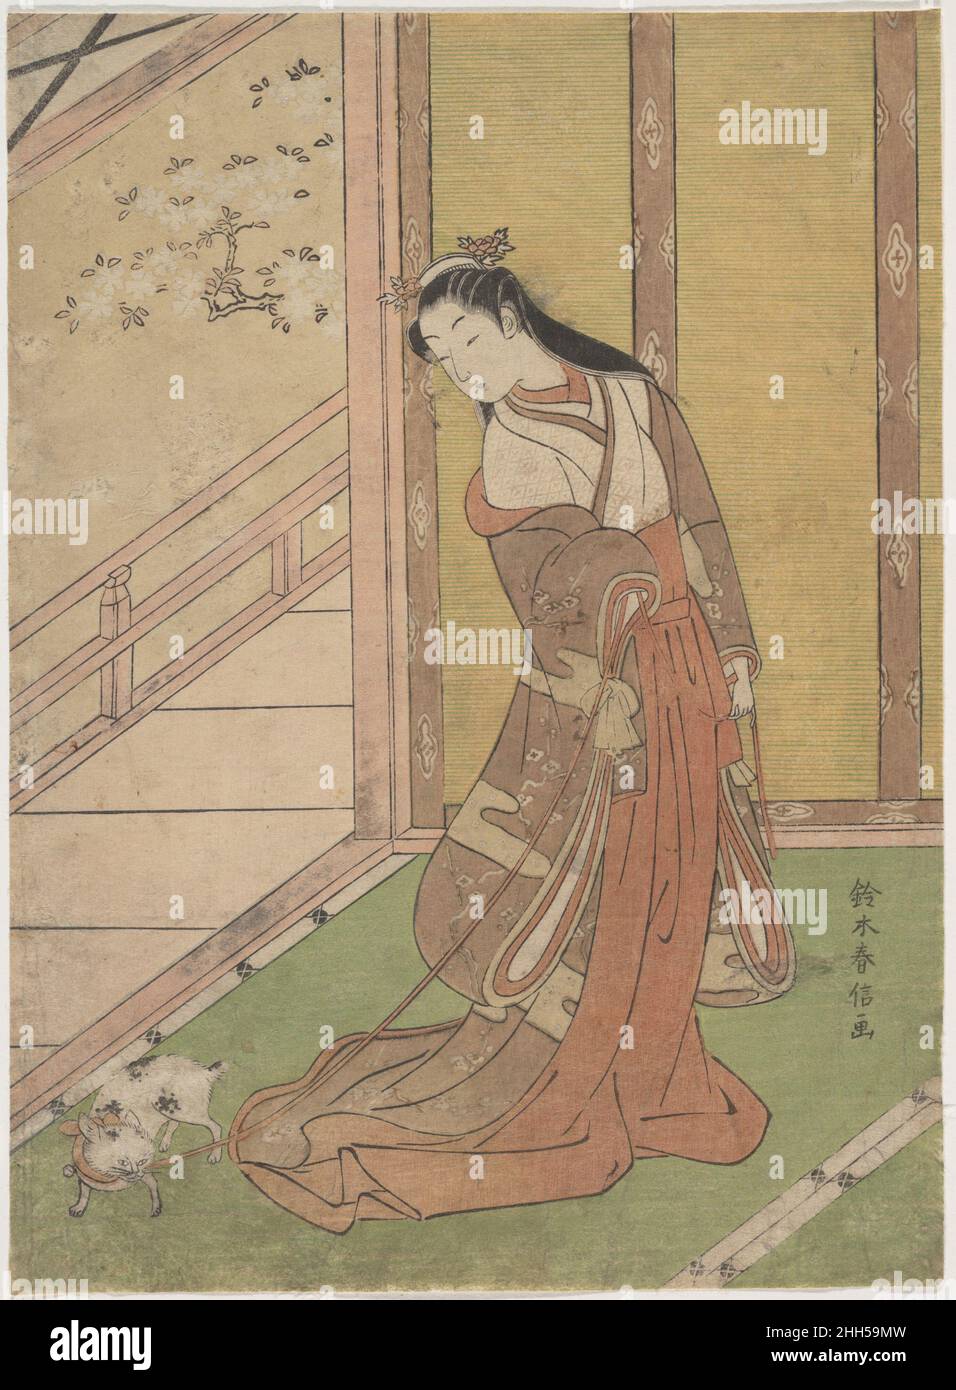 Onna San no Miya (the Third Princess) 1768–70 Suzuki Harunobu Japanese For Harunobu's sophisticated patrons, this deceptively calm scene of a palace beauty on a spring day invoked one of classic literature's most stirring tragedies. The young woman in aristocratic garb with her lively cat appears frequently in ukiyo-e and recalls a pivotal incident in the early-eleventh-century romance of Genji, the 'shining prince' who personified the Heian court's ideal of aesthetic sensitivity and discernment in the conduct of personal and public life. The doll-like figure with long flowing hair and trailin Stock Photo